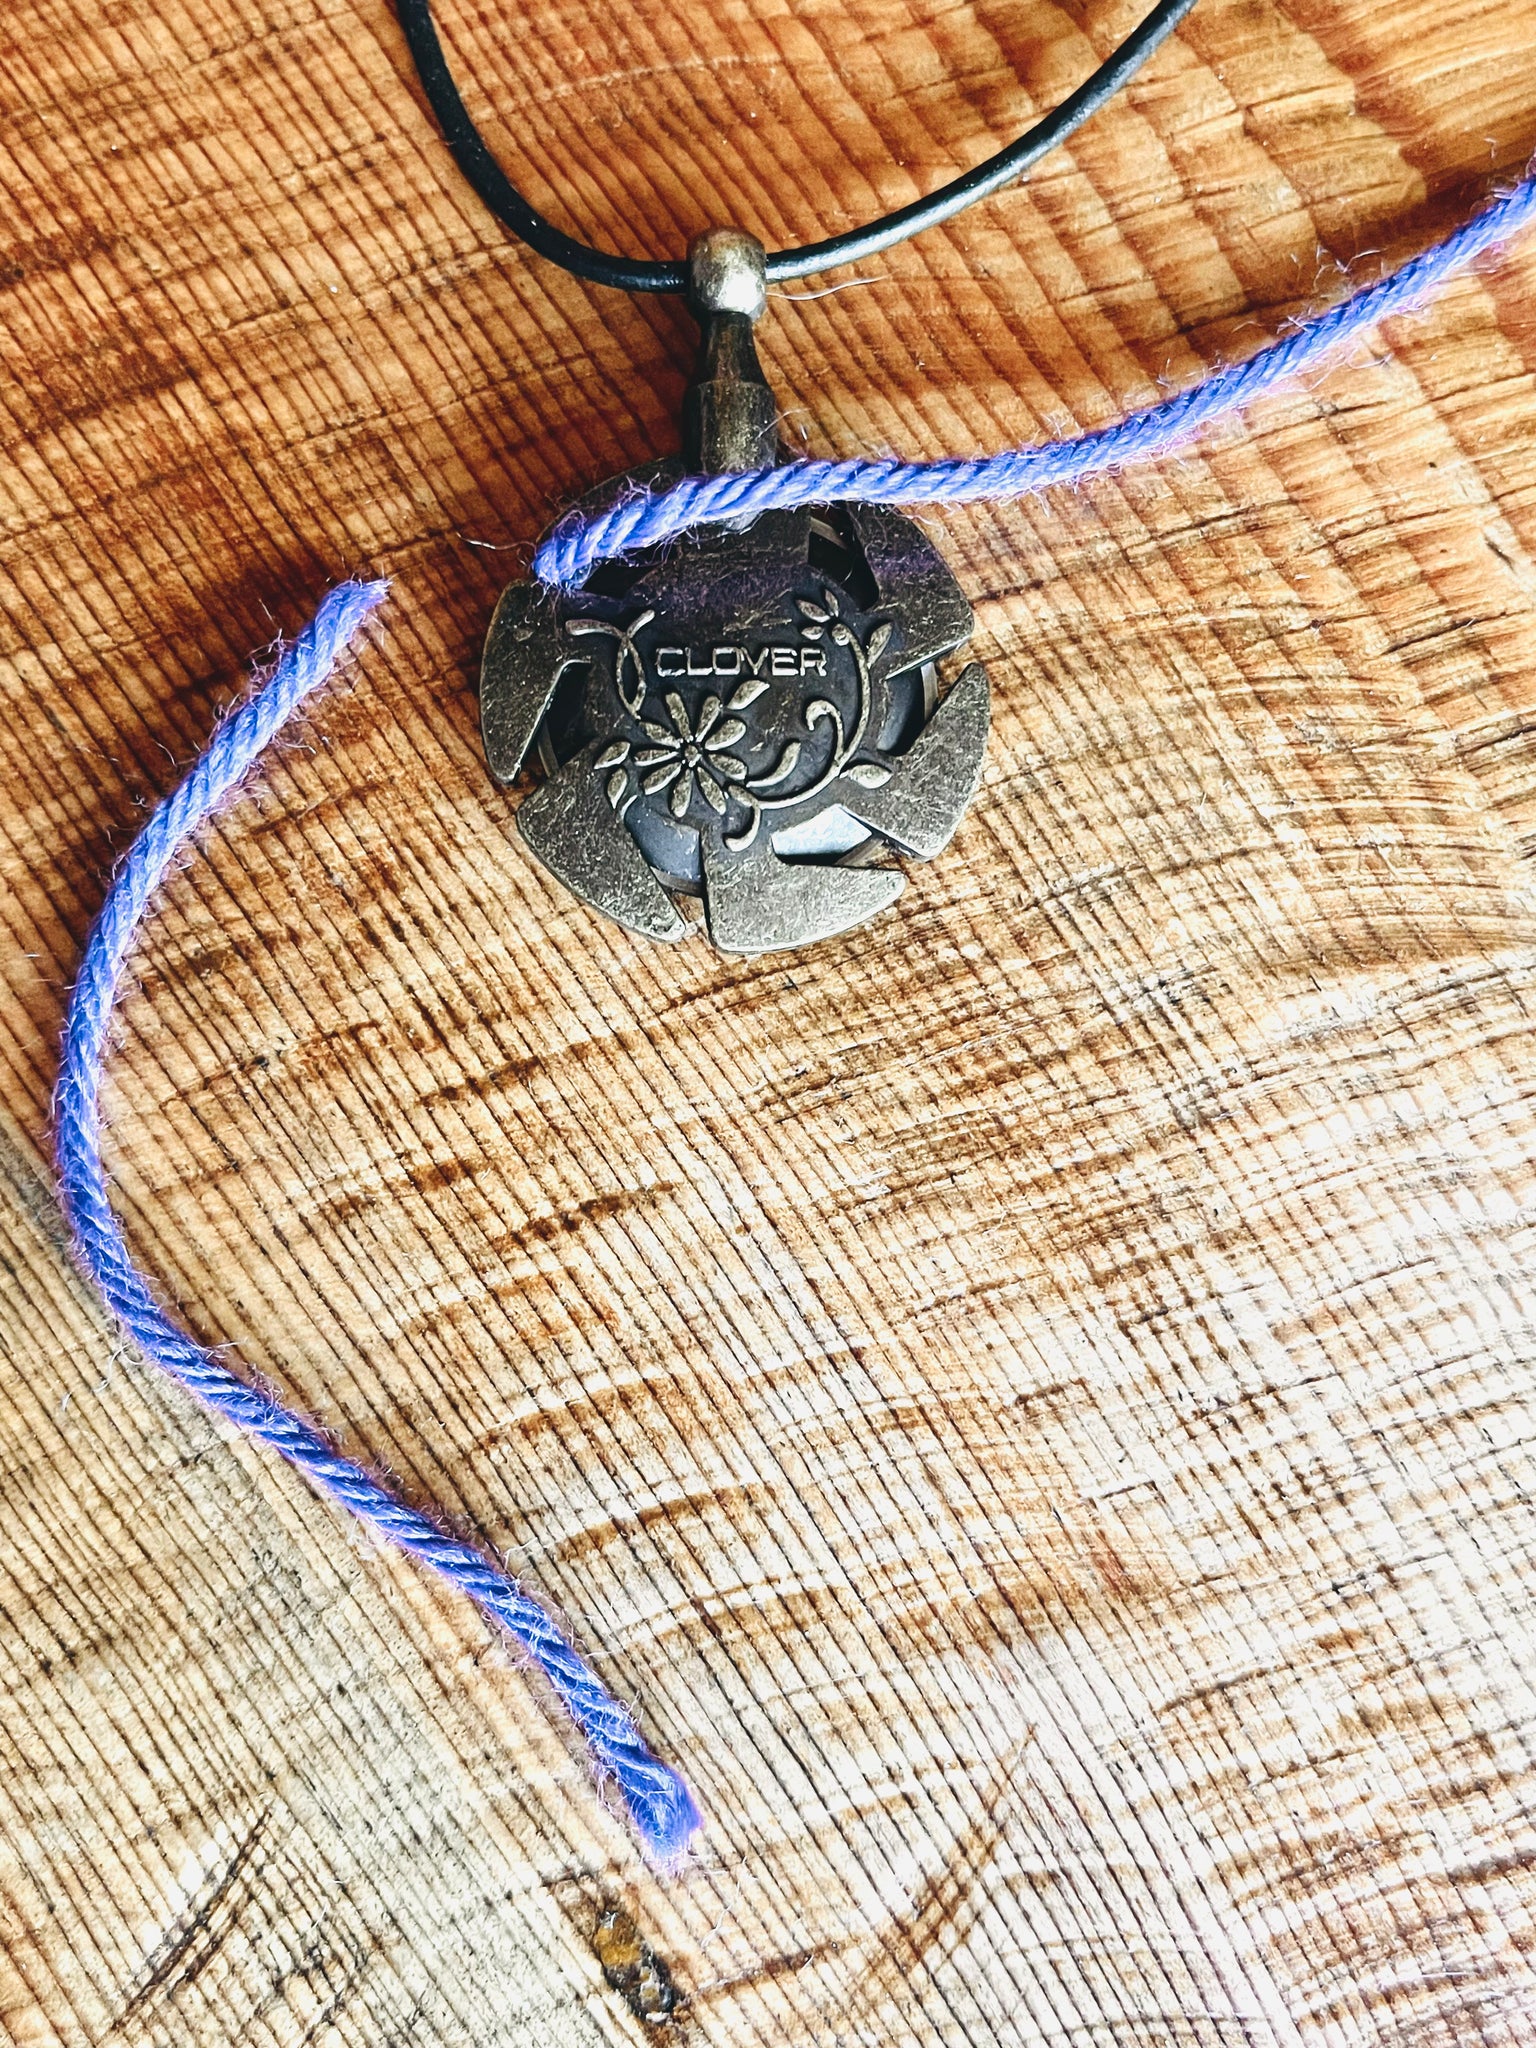 Yarn Cutter Pendant on Leather – Knots of Love